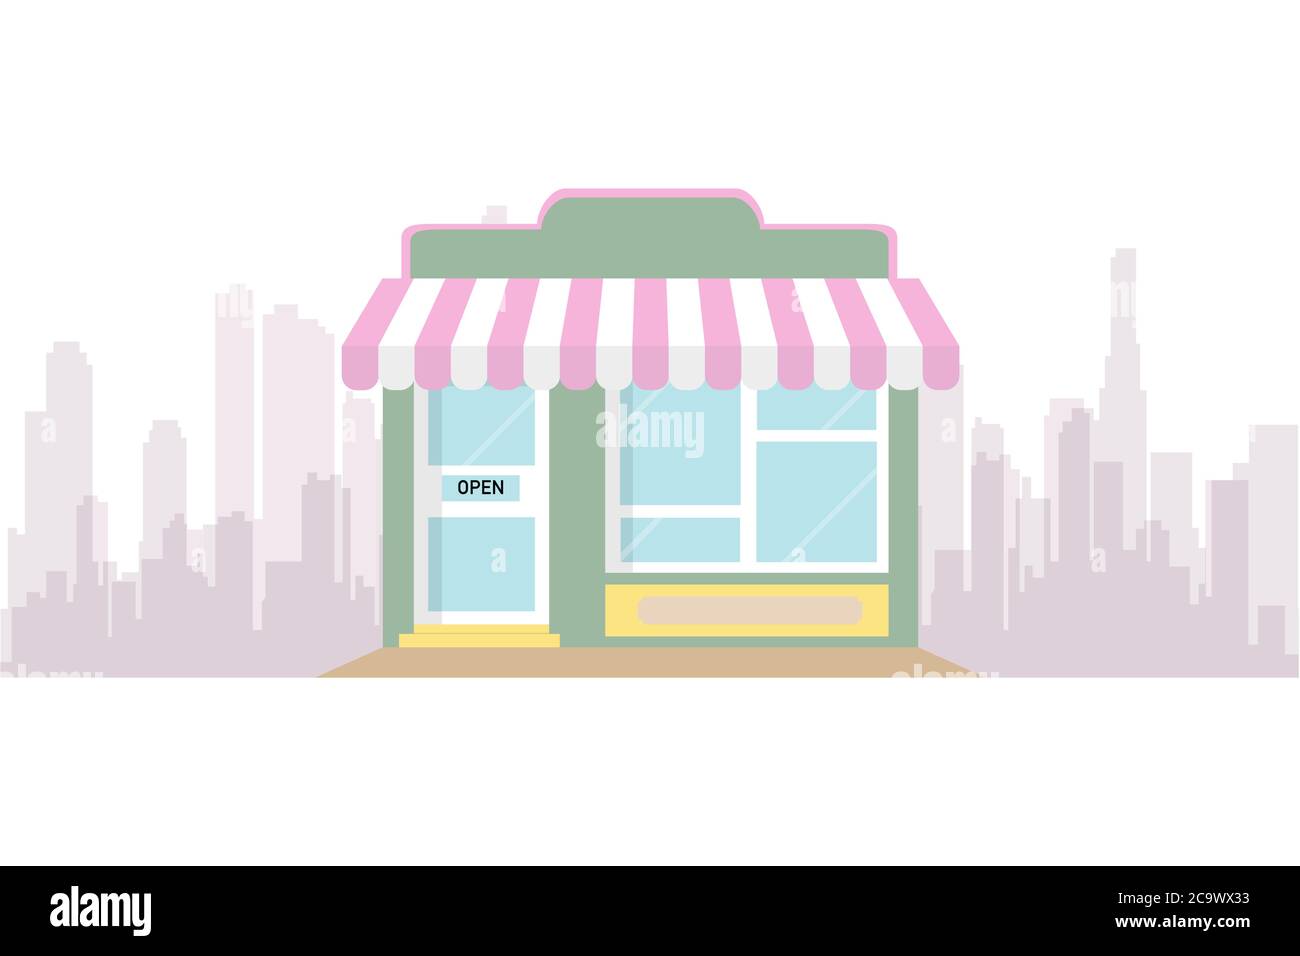 Storefront in city vector illustration, restaurant cafe or store building on town street landscape, flat cartoon style shop facade front view Stock Vector